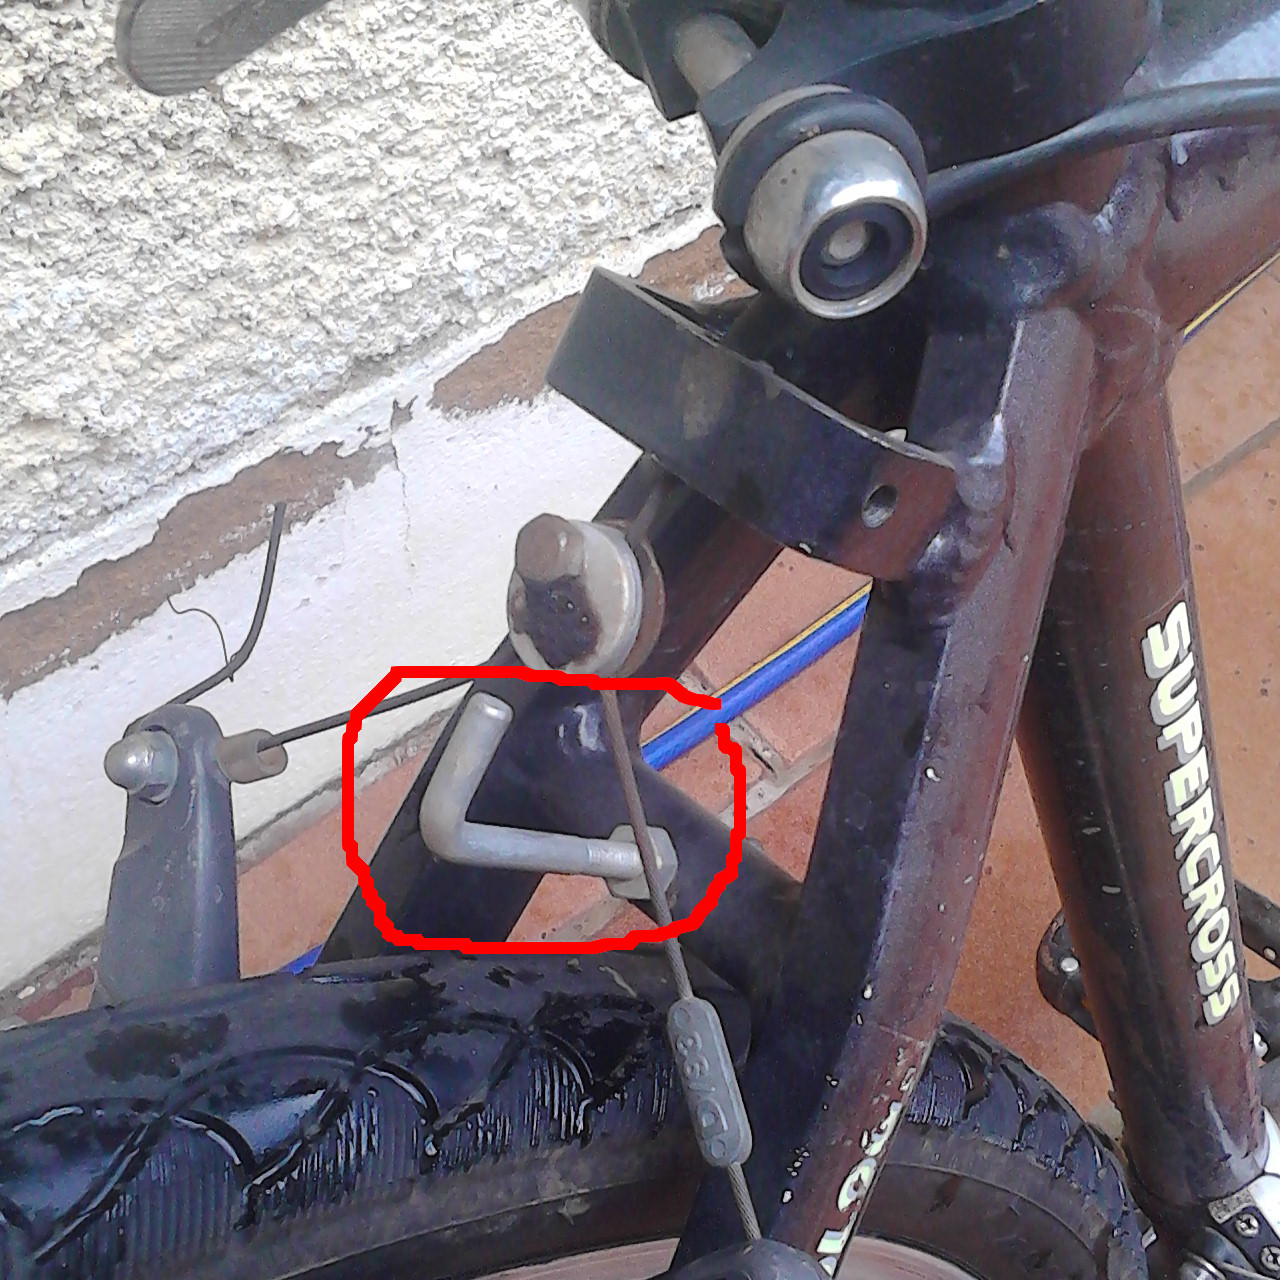 Hook on the rear tube, circled in red